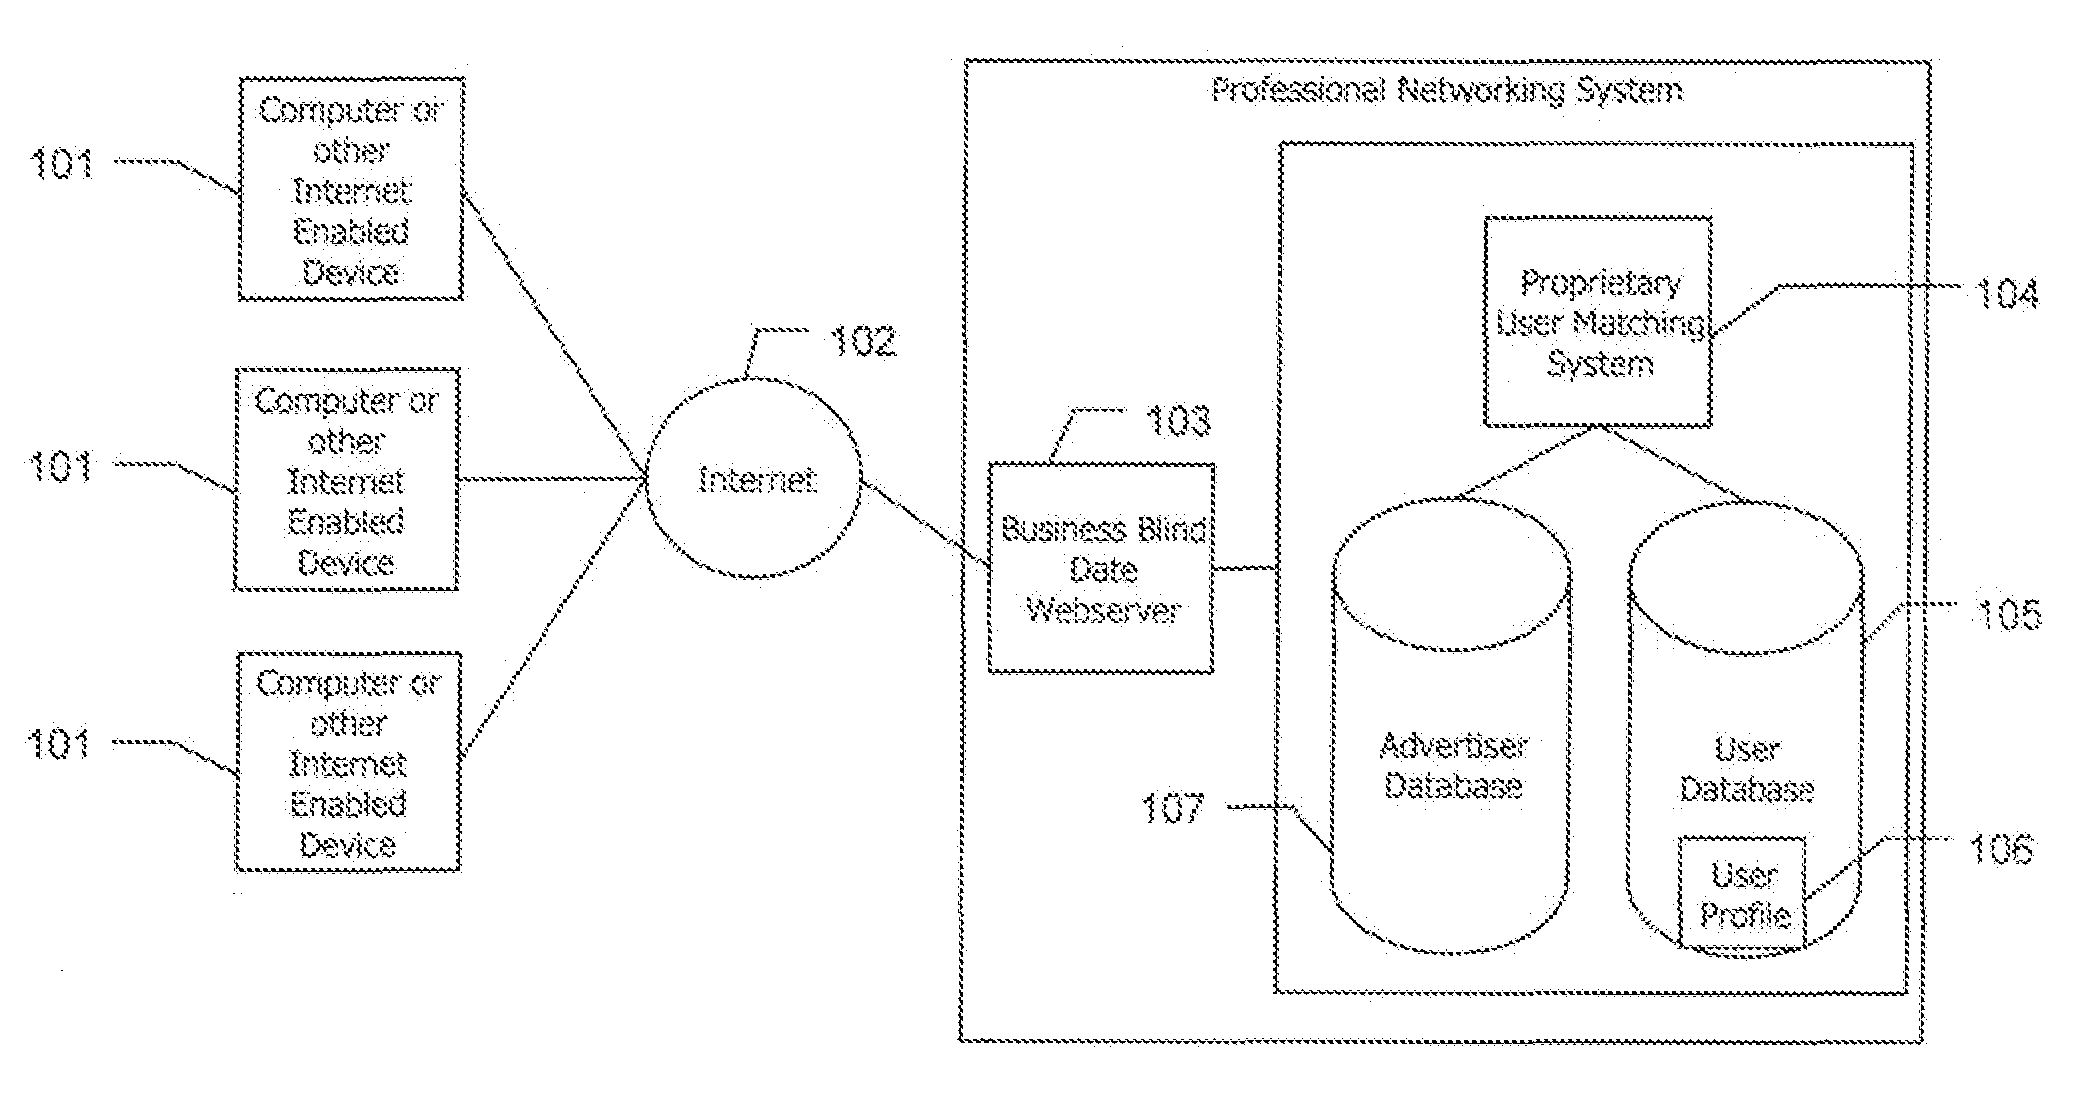 System and method of matching professionals for networking meetings